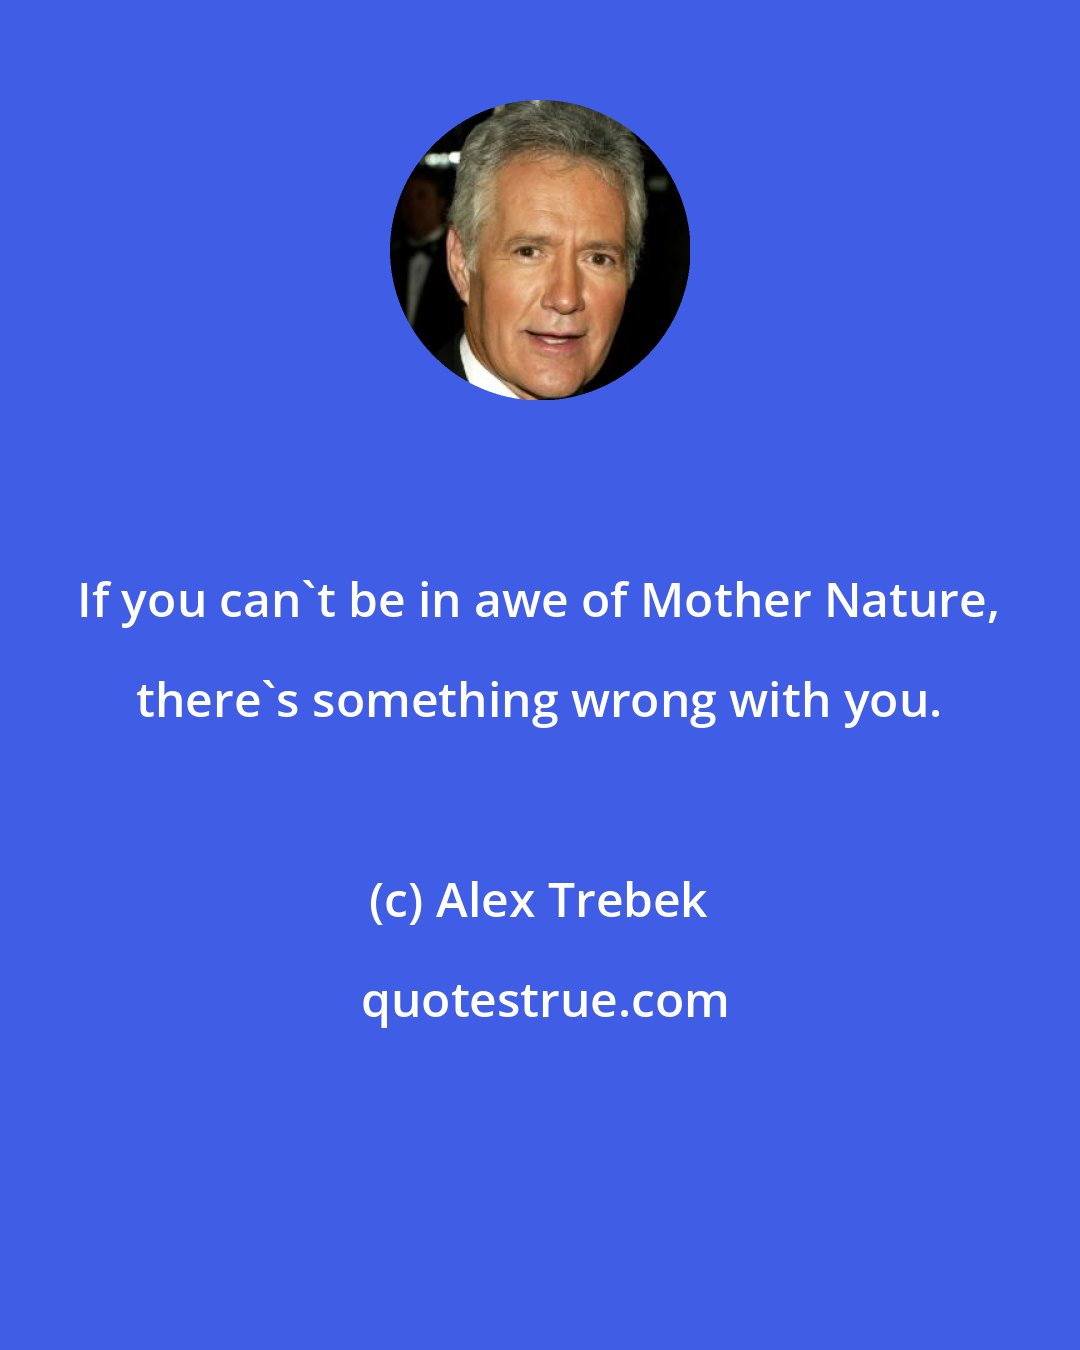 Alex Trebek: If you can't be in awe of Mother Nature, there's something wrong with you.